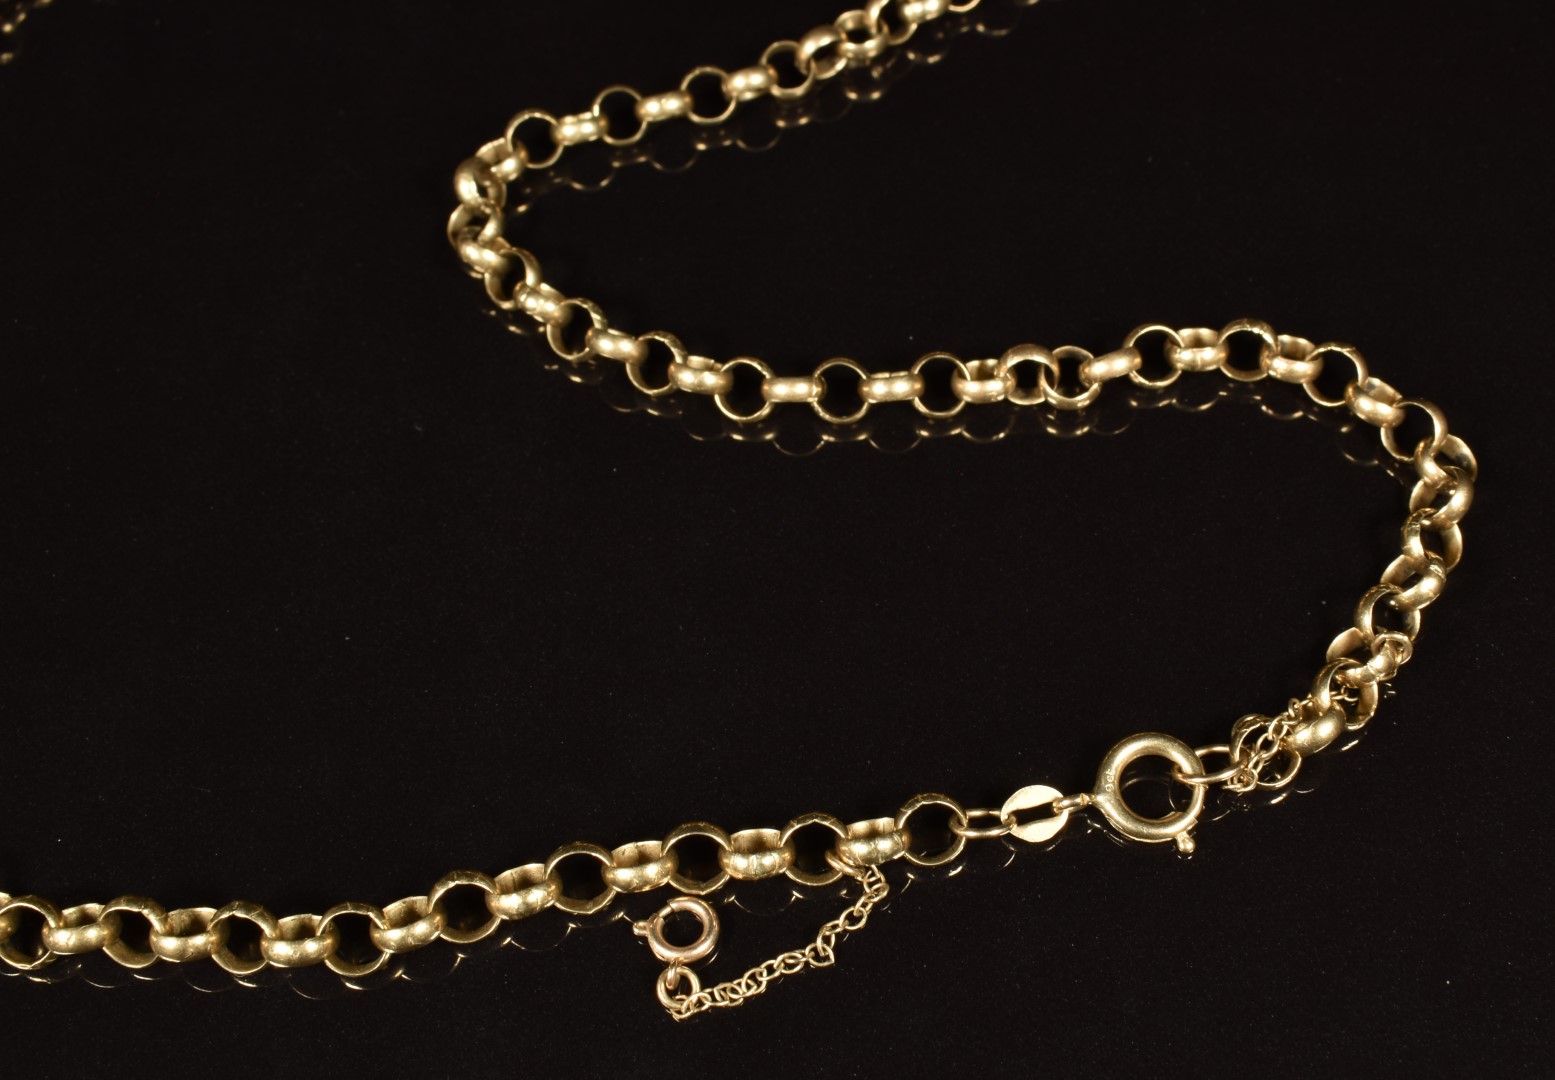 A 9ct gold belcher chain /necklace made up of circular links, length 56cm, 20g - Image 3 of 3